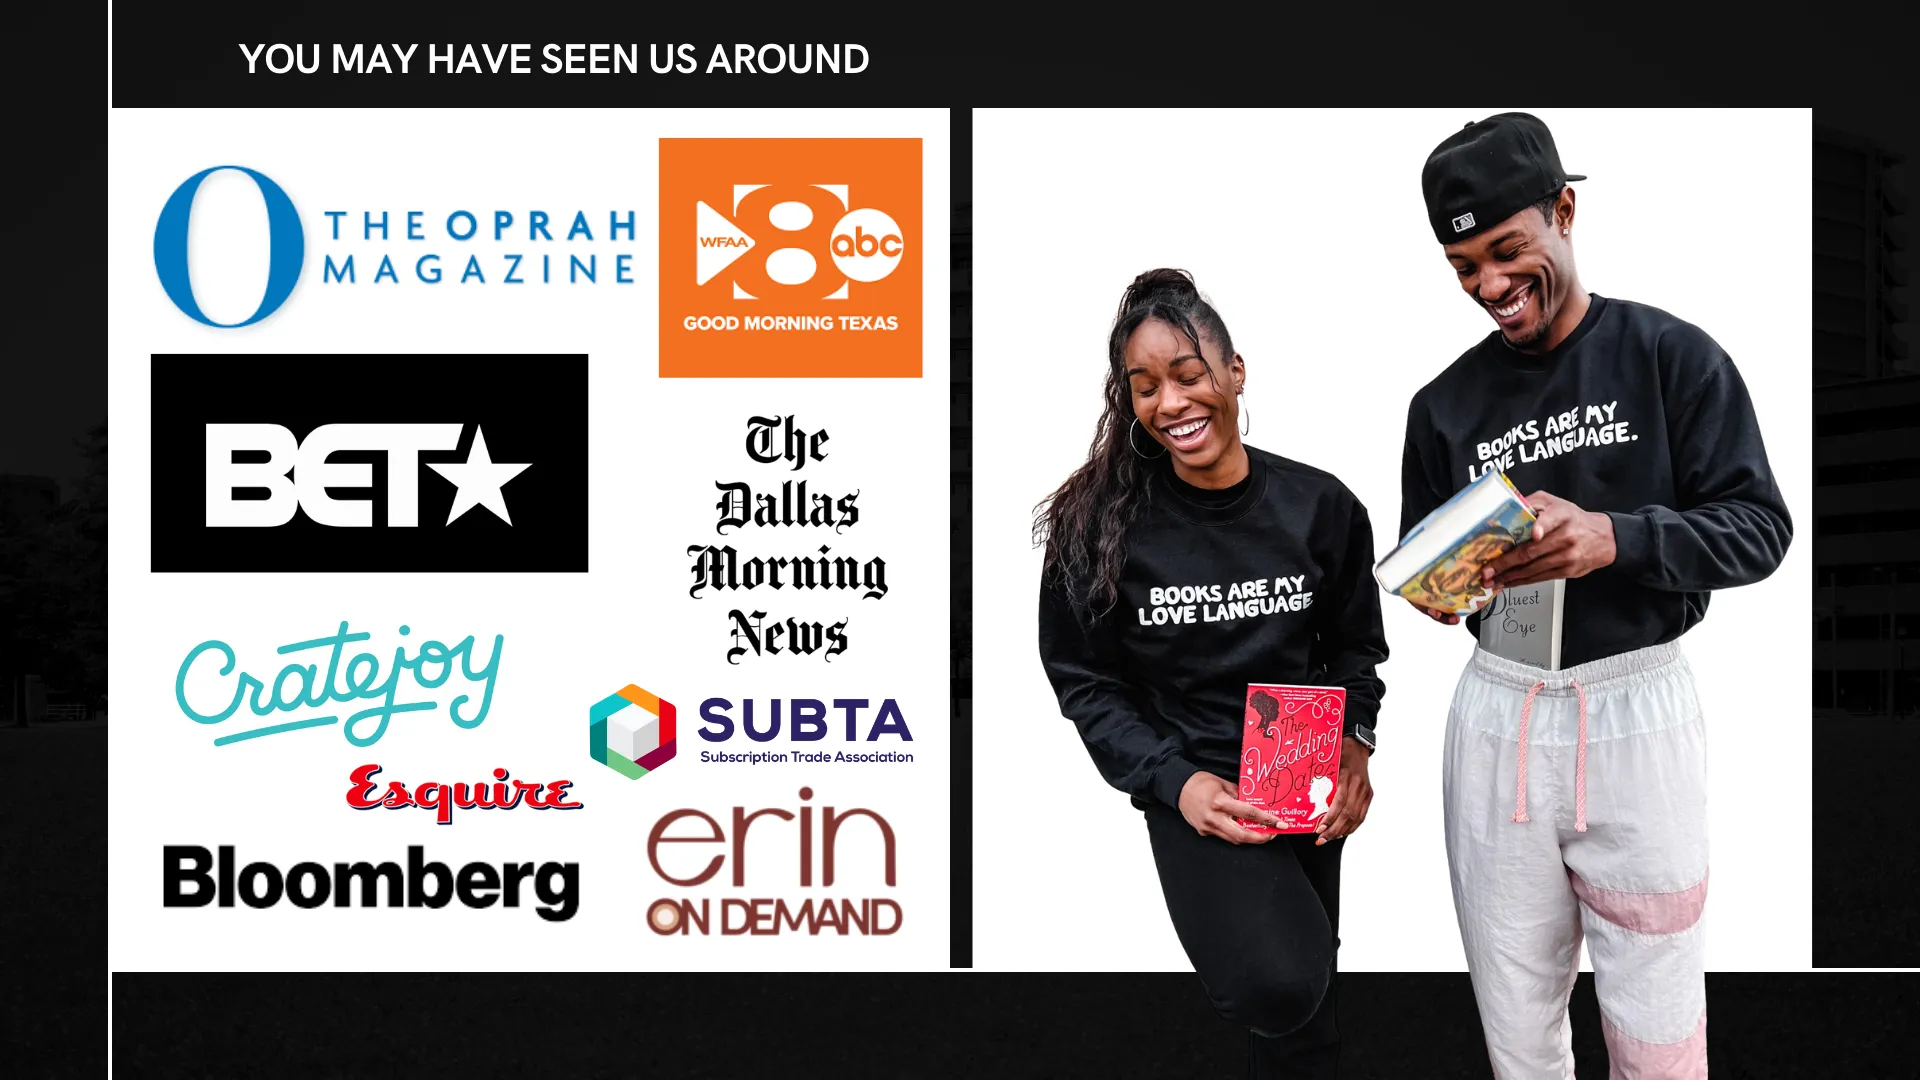 You may have seen us around. BLACKLIT has been featured in Oprah Magazine, BET, Good Morning Texas, The Dallas Morning News, Bloomberg, SUBTA, Erin On Demand, Esquire, and more!